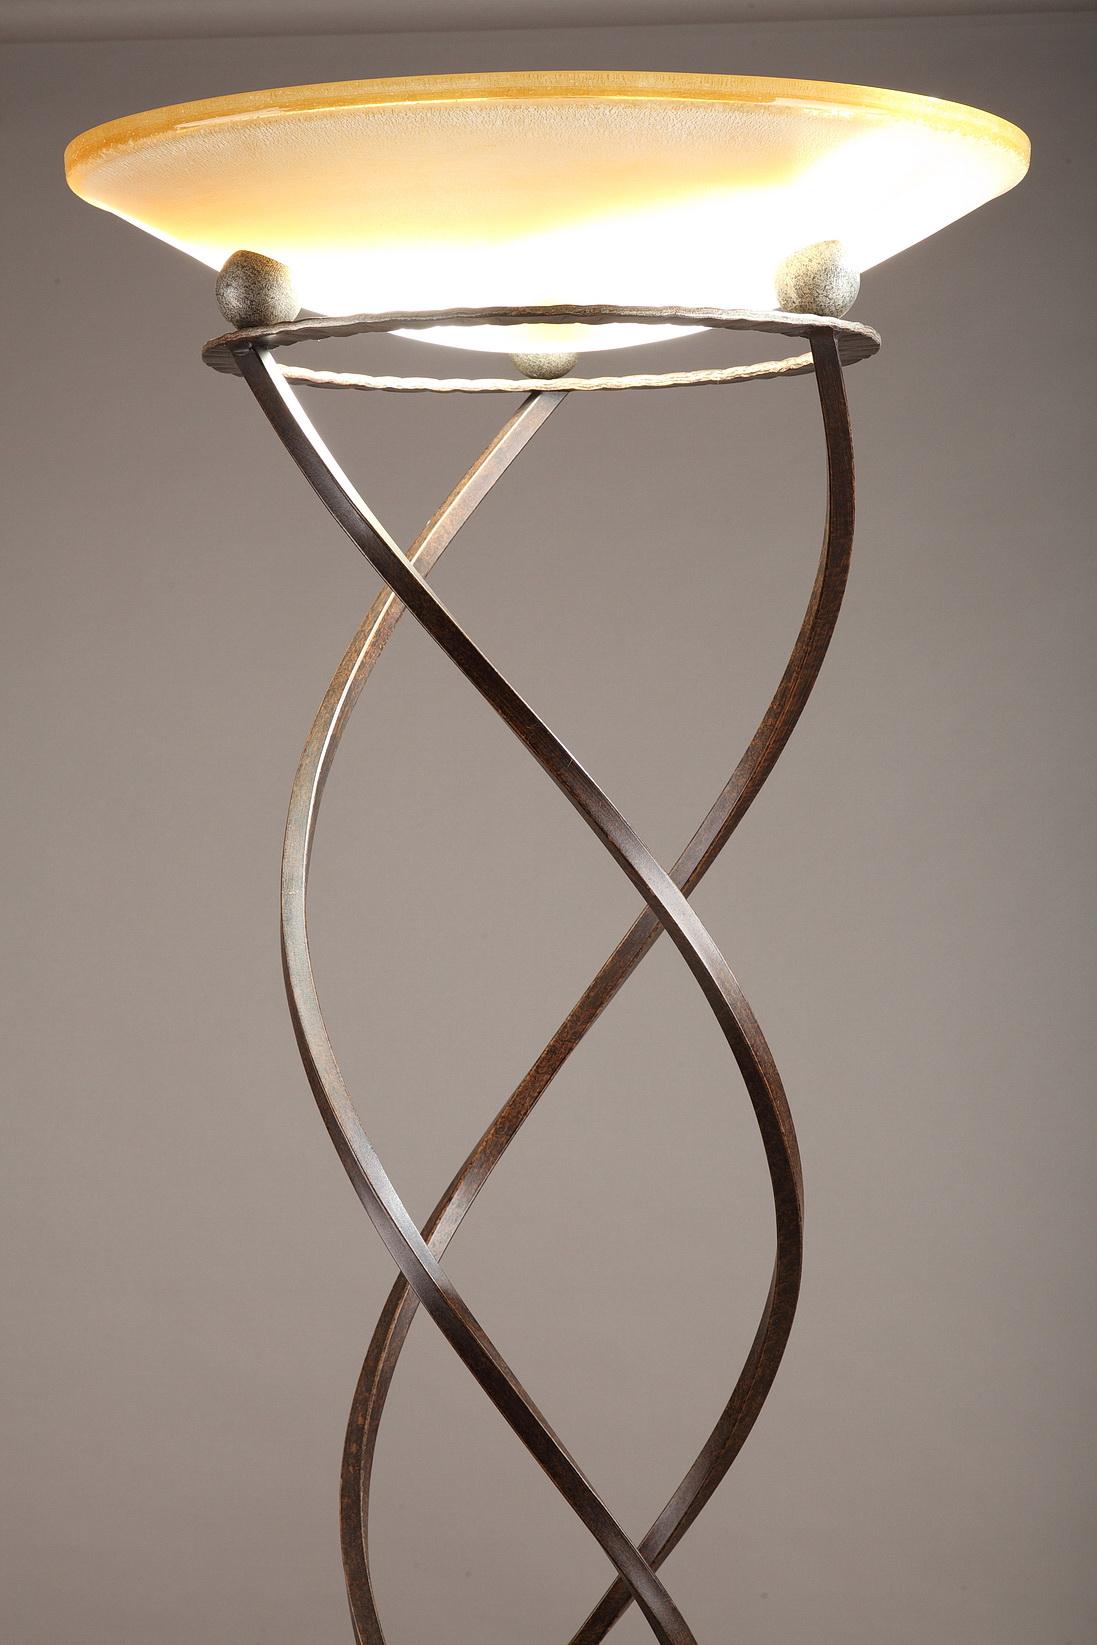 Antinea Floor Lamp by Jean-françois Crochet, Published by Terzani, 20th Century For Sale 5